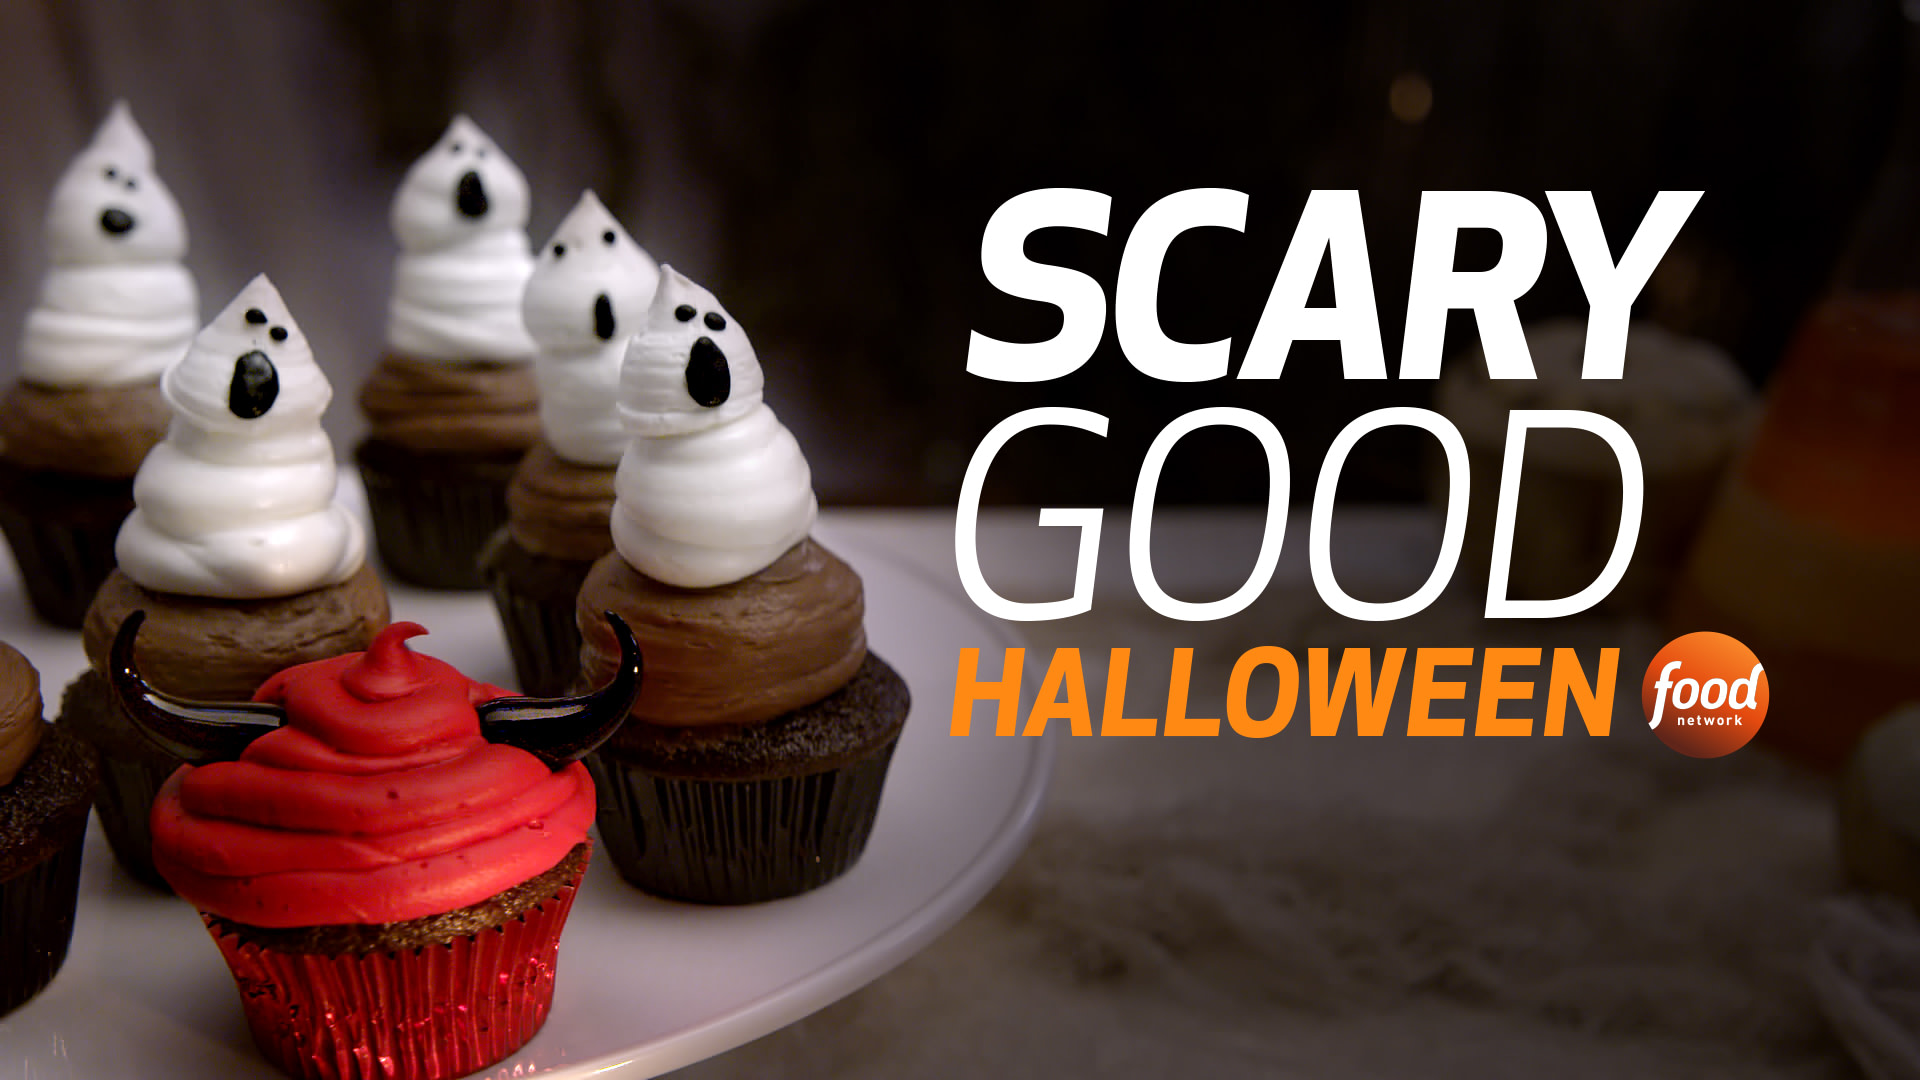 Food Network Halloween Season Filled with Ghouls, Goblins, Great Food